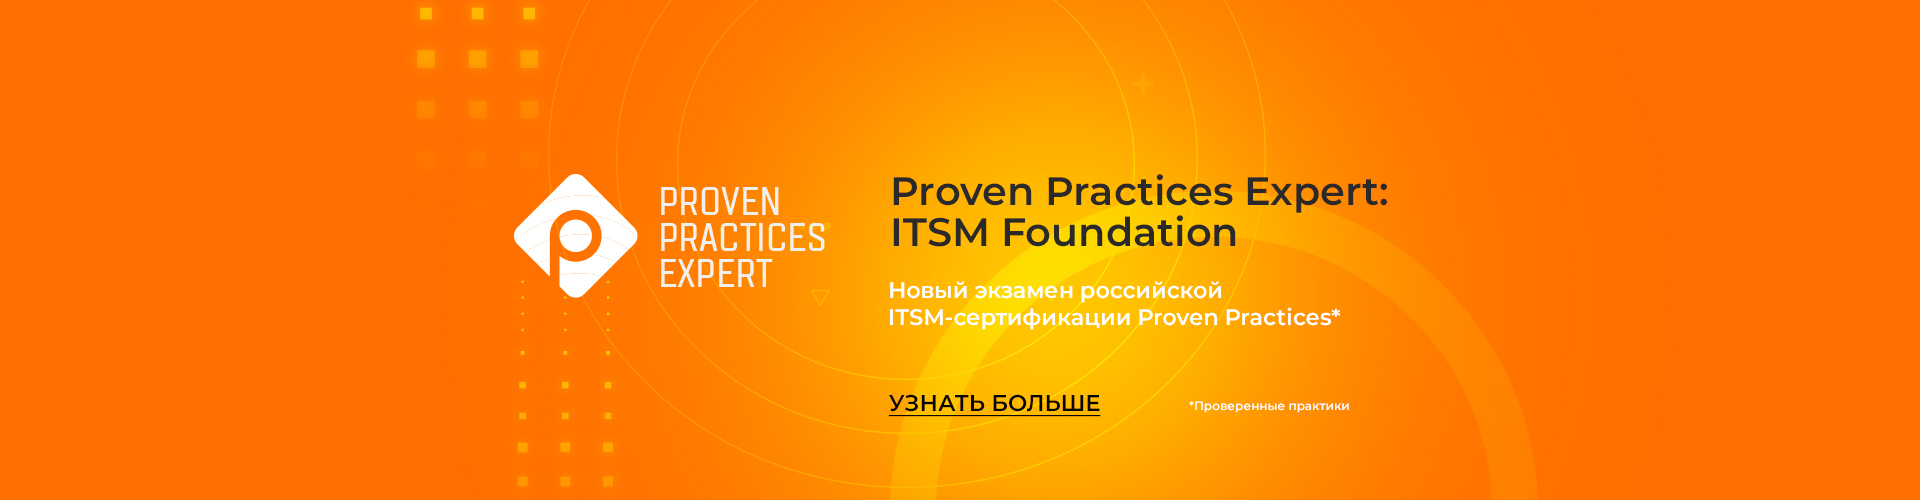 Proven Practices Expert: ITSM Foundation